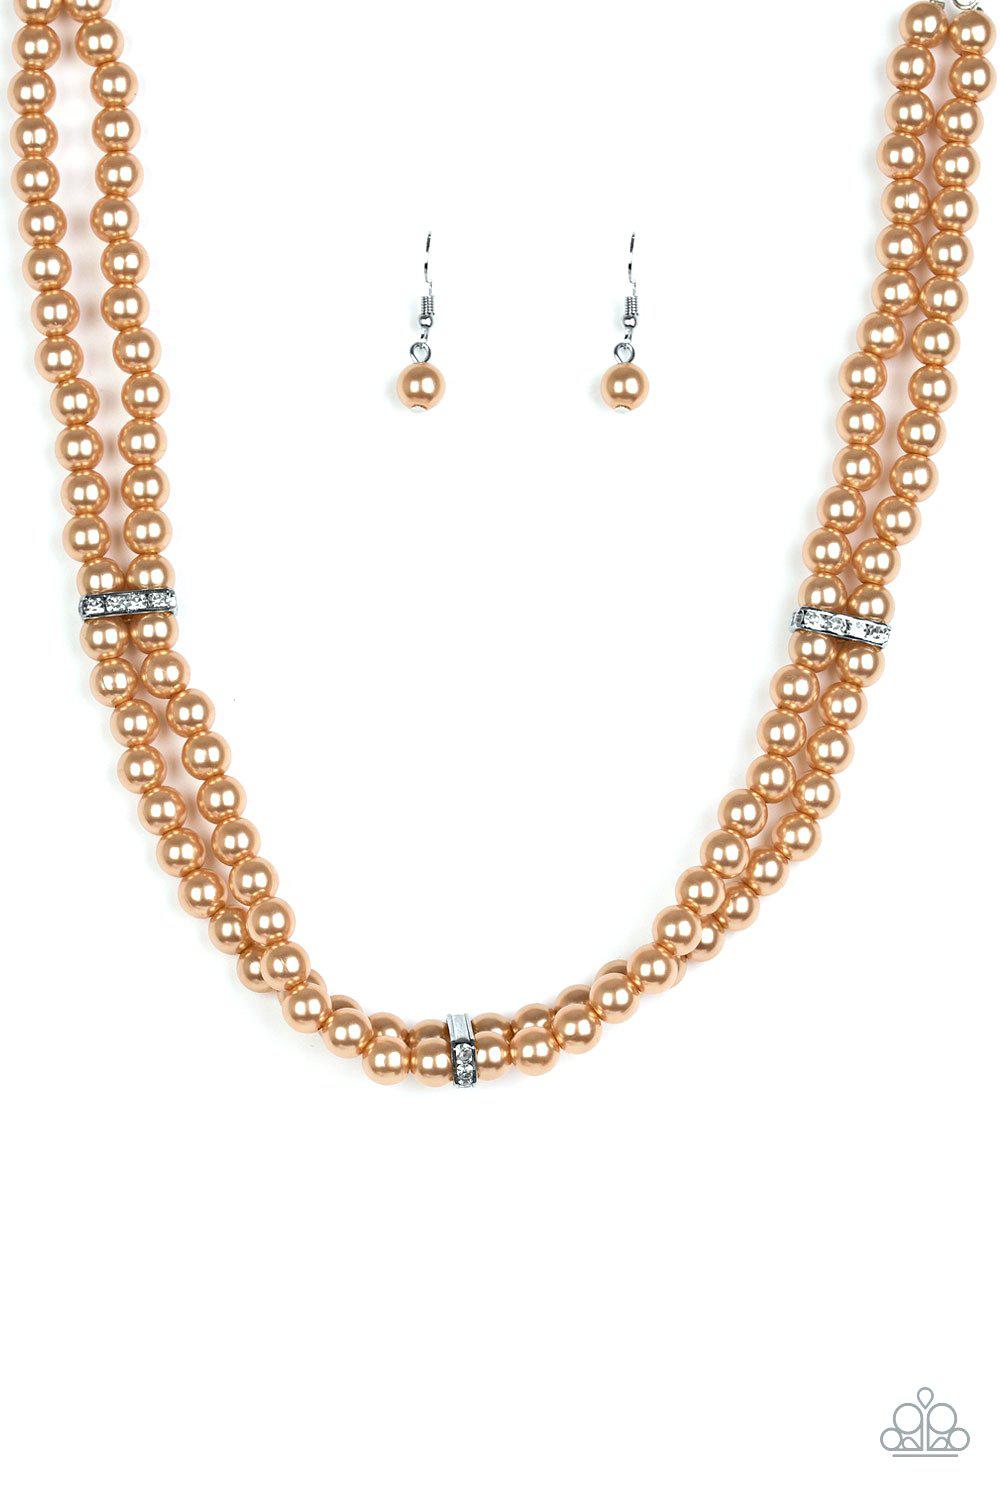 Put On Your Party Dress Brown Pearl Necklace - Paparazzi Accessories- lightbox - CarasShop.com - $5 Jewelry by Cara Jewels